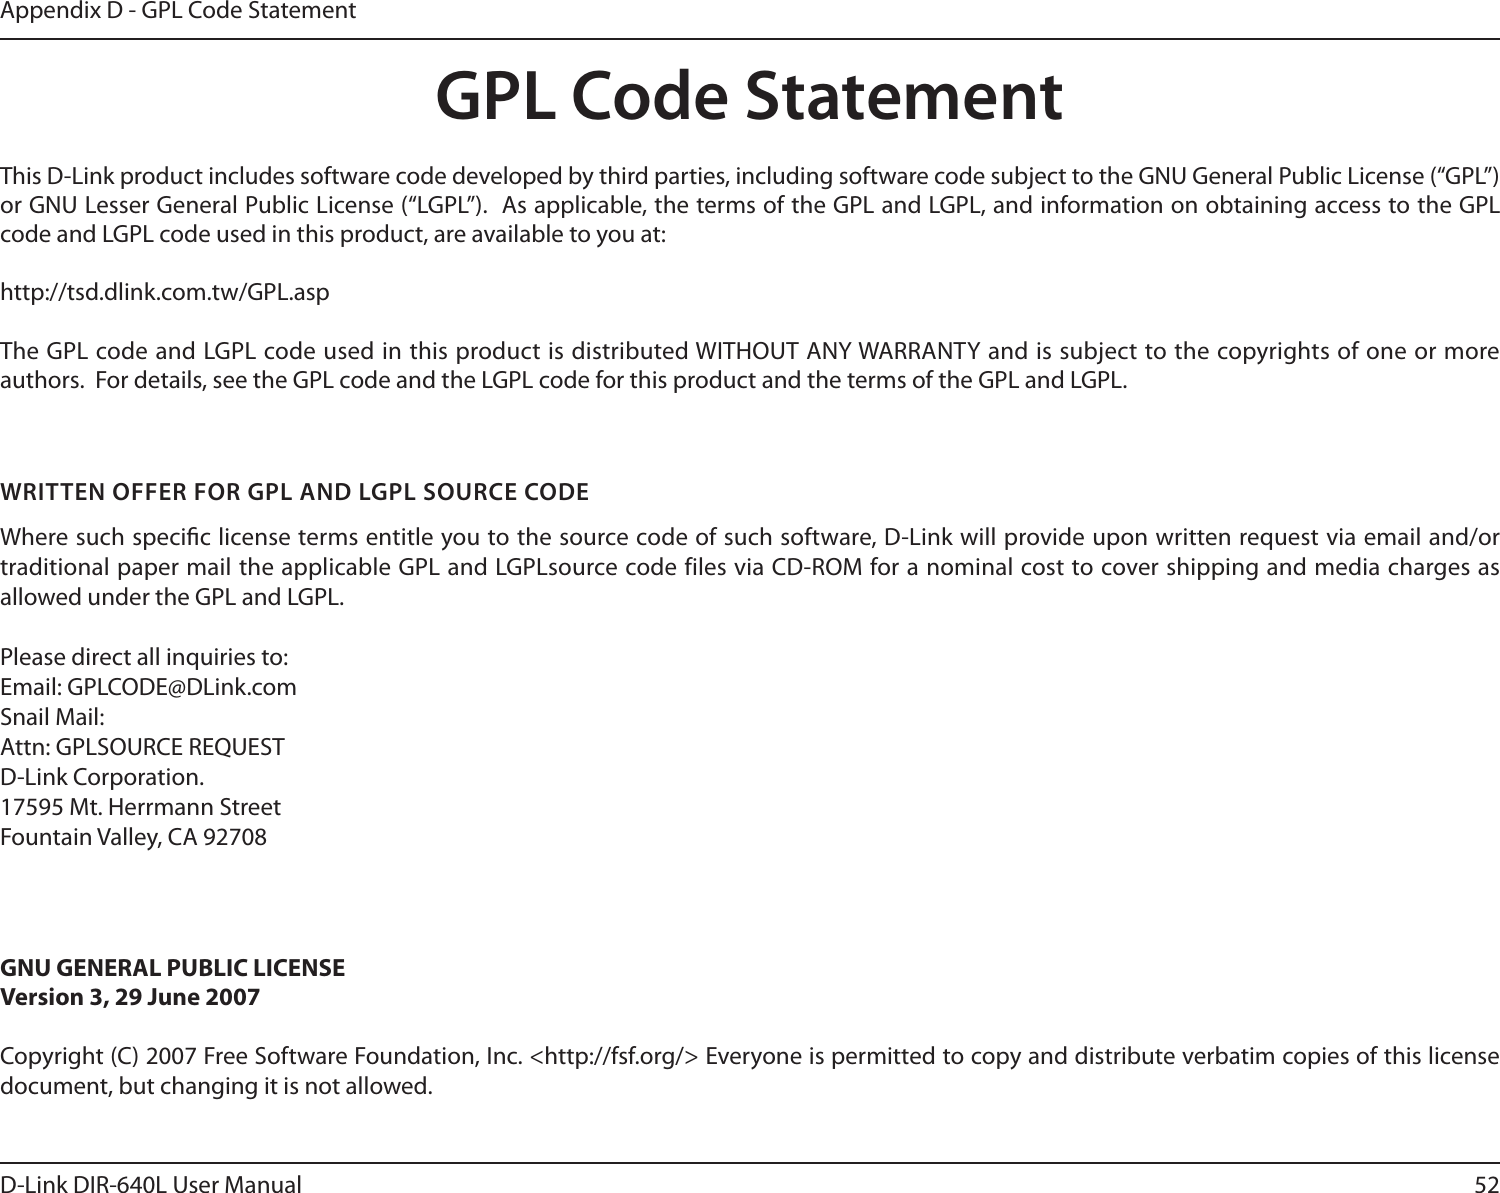 52D-Link DIR-640L User ManualAppendix D - GPL Code StatementGPL Code StatementThis D-Link product includes software code developed by third parties, including software code subject to the GNU General Public License (“GPL”) or GNU Lesser General Public License (“LGPL”).  As applicable, the terms of the GPL and LGPL, and information on obtaining access to the GPL code and LGPL code used in this product, are available to you at:http://tsd.dlink.com.tw/GPL.aspThe GPL code and LGPL code used in this product is distributed WITHOUT ANY WARRANTY and is subject to the copyrights of one or more authors.  For details, see the GPL code and the LGPL code for this product and the terms of the GPL and LGPL.WRITTEN OFFER FOR GPL AND LGPL SOURCE CODEWhere such specic license terms entitle you to the source code of such software, D-Link will provide upon written request via email and/or traditional paper mail the applicable GPL and LGPLsource code files via CD-ROM for a nominal cost to cover shipping and media charges as allowed under the GPL and LGPL.  Please direct all inquiries to:Email: GPLCODE@DLink.comSnail Mail:Attn: GPLSOURCE REQUESTD-Link Corporation.17595 Mt. Herrmann StreetFountain Valley, CA 92708GNU GENERAL PUBLIC LICENSEVersion 3, 29 June 2007Copyright (C) 2007 Free Software Foundation, Inc. &lt;http://fsf.org/&gt; Everyone is permitted to copy and distribute verbatim copies of this license document, but changing it is not allowed.